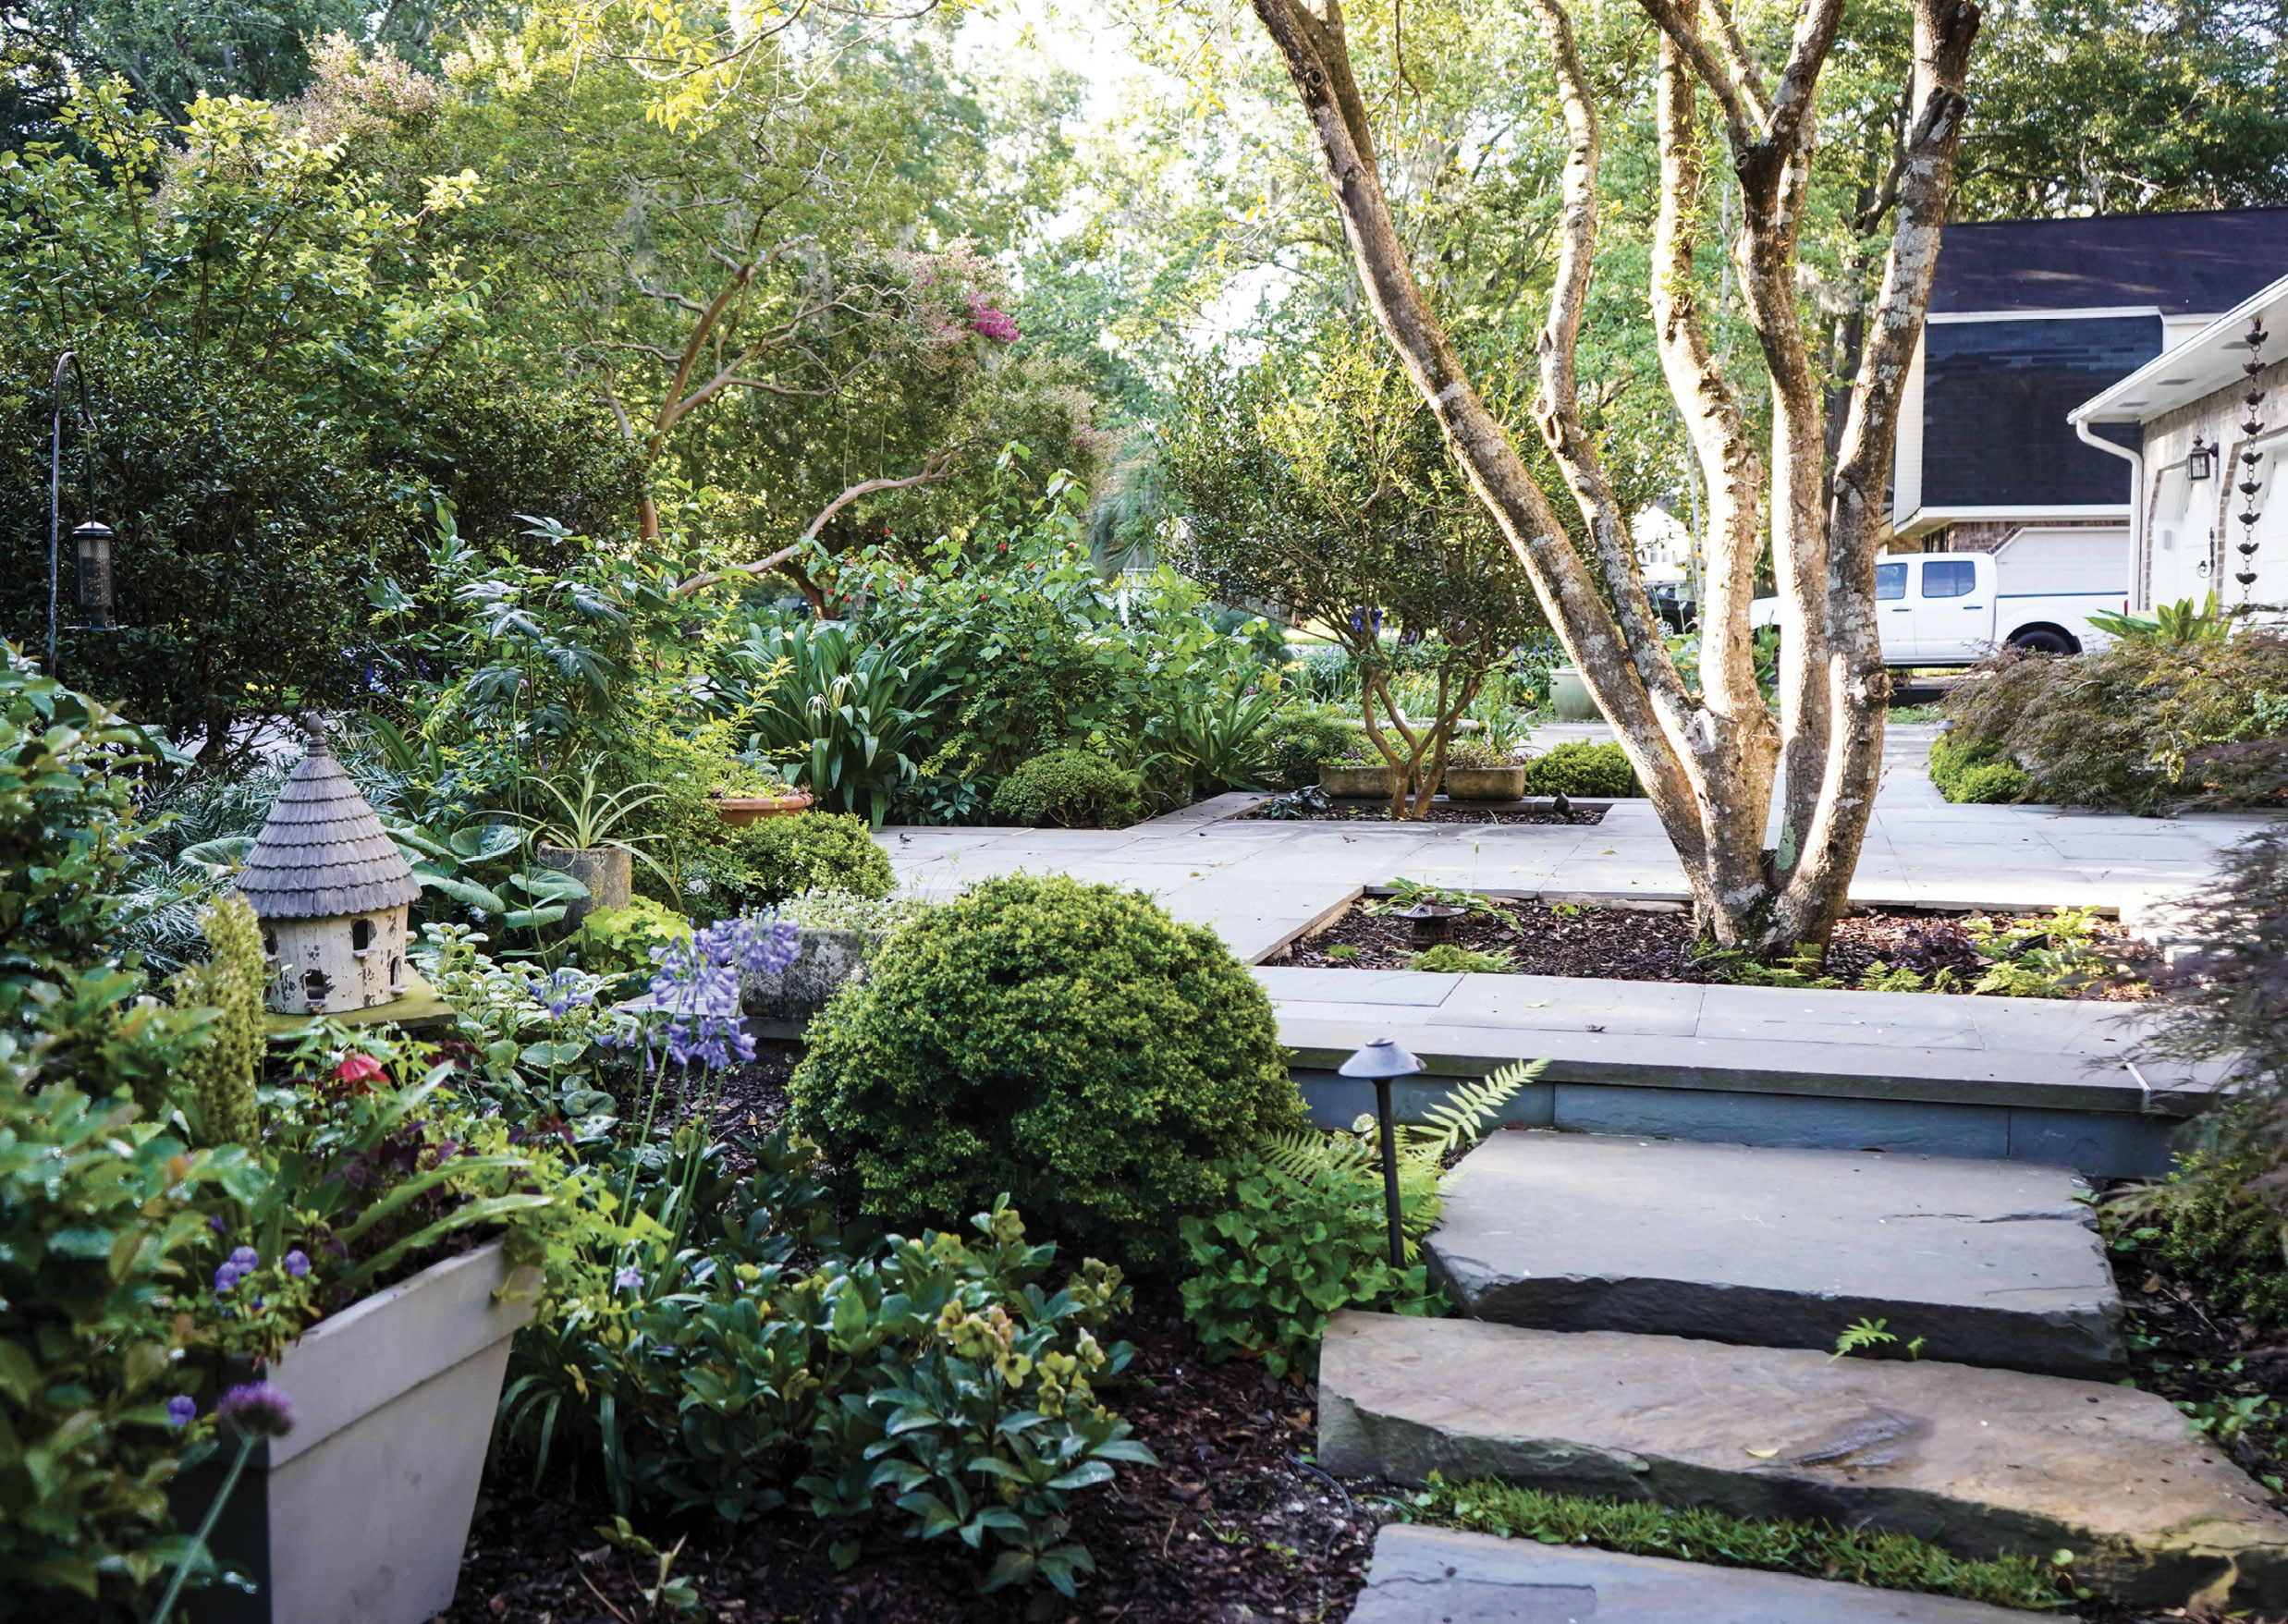 Elevated Entrance: Rivers transformed her front yard with a raised terrace that stretches from her porch toward the street and incorporates a tea olive and sasanqua camellia. A flagstone path accentuates the elevation change, curving among plantings such as (above) agapanthus, which Rivers values more for its strappy leaves than its blue flowers, and hellebores, blooming here in front of a ’Kingsville’ boxwood..